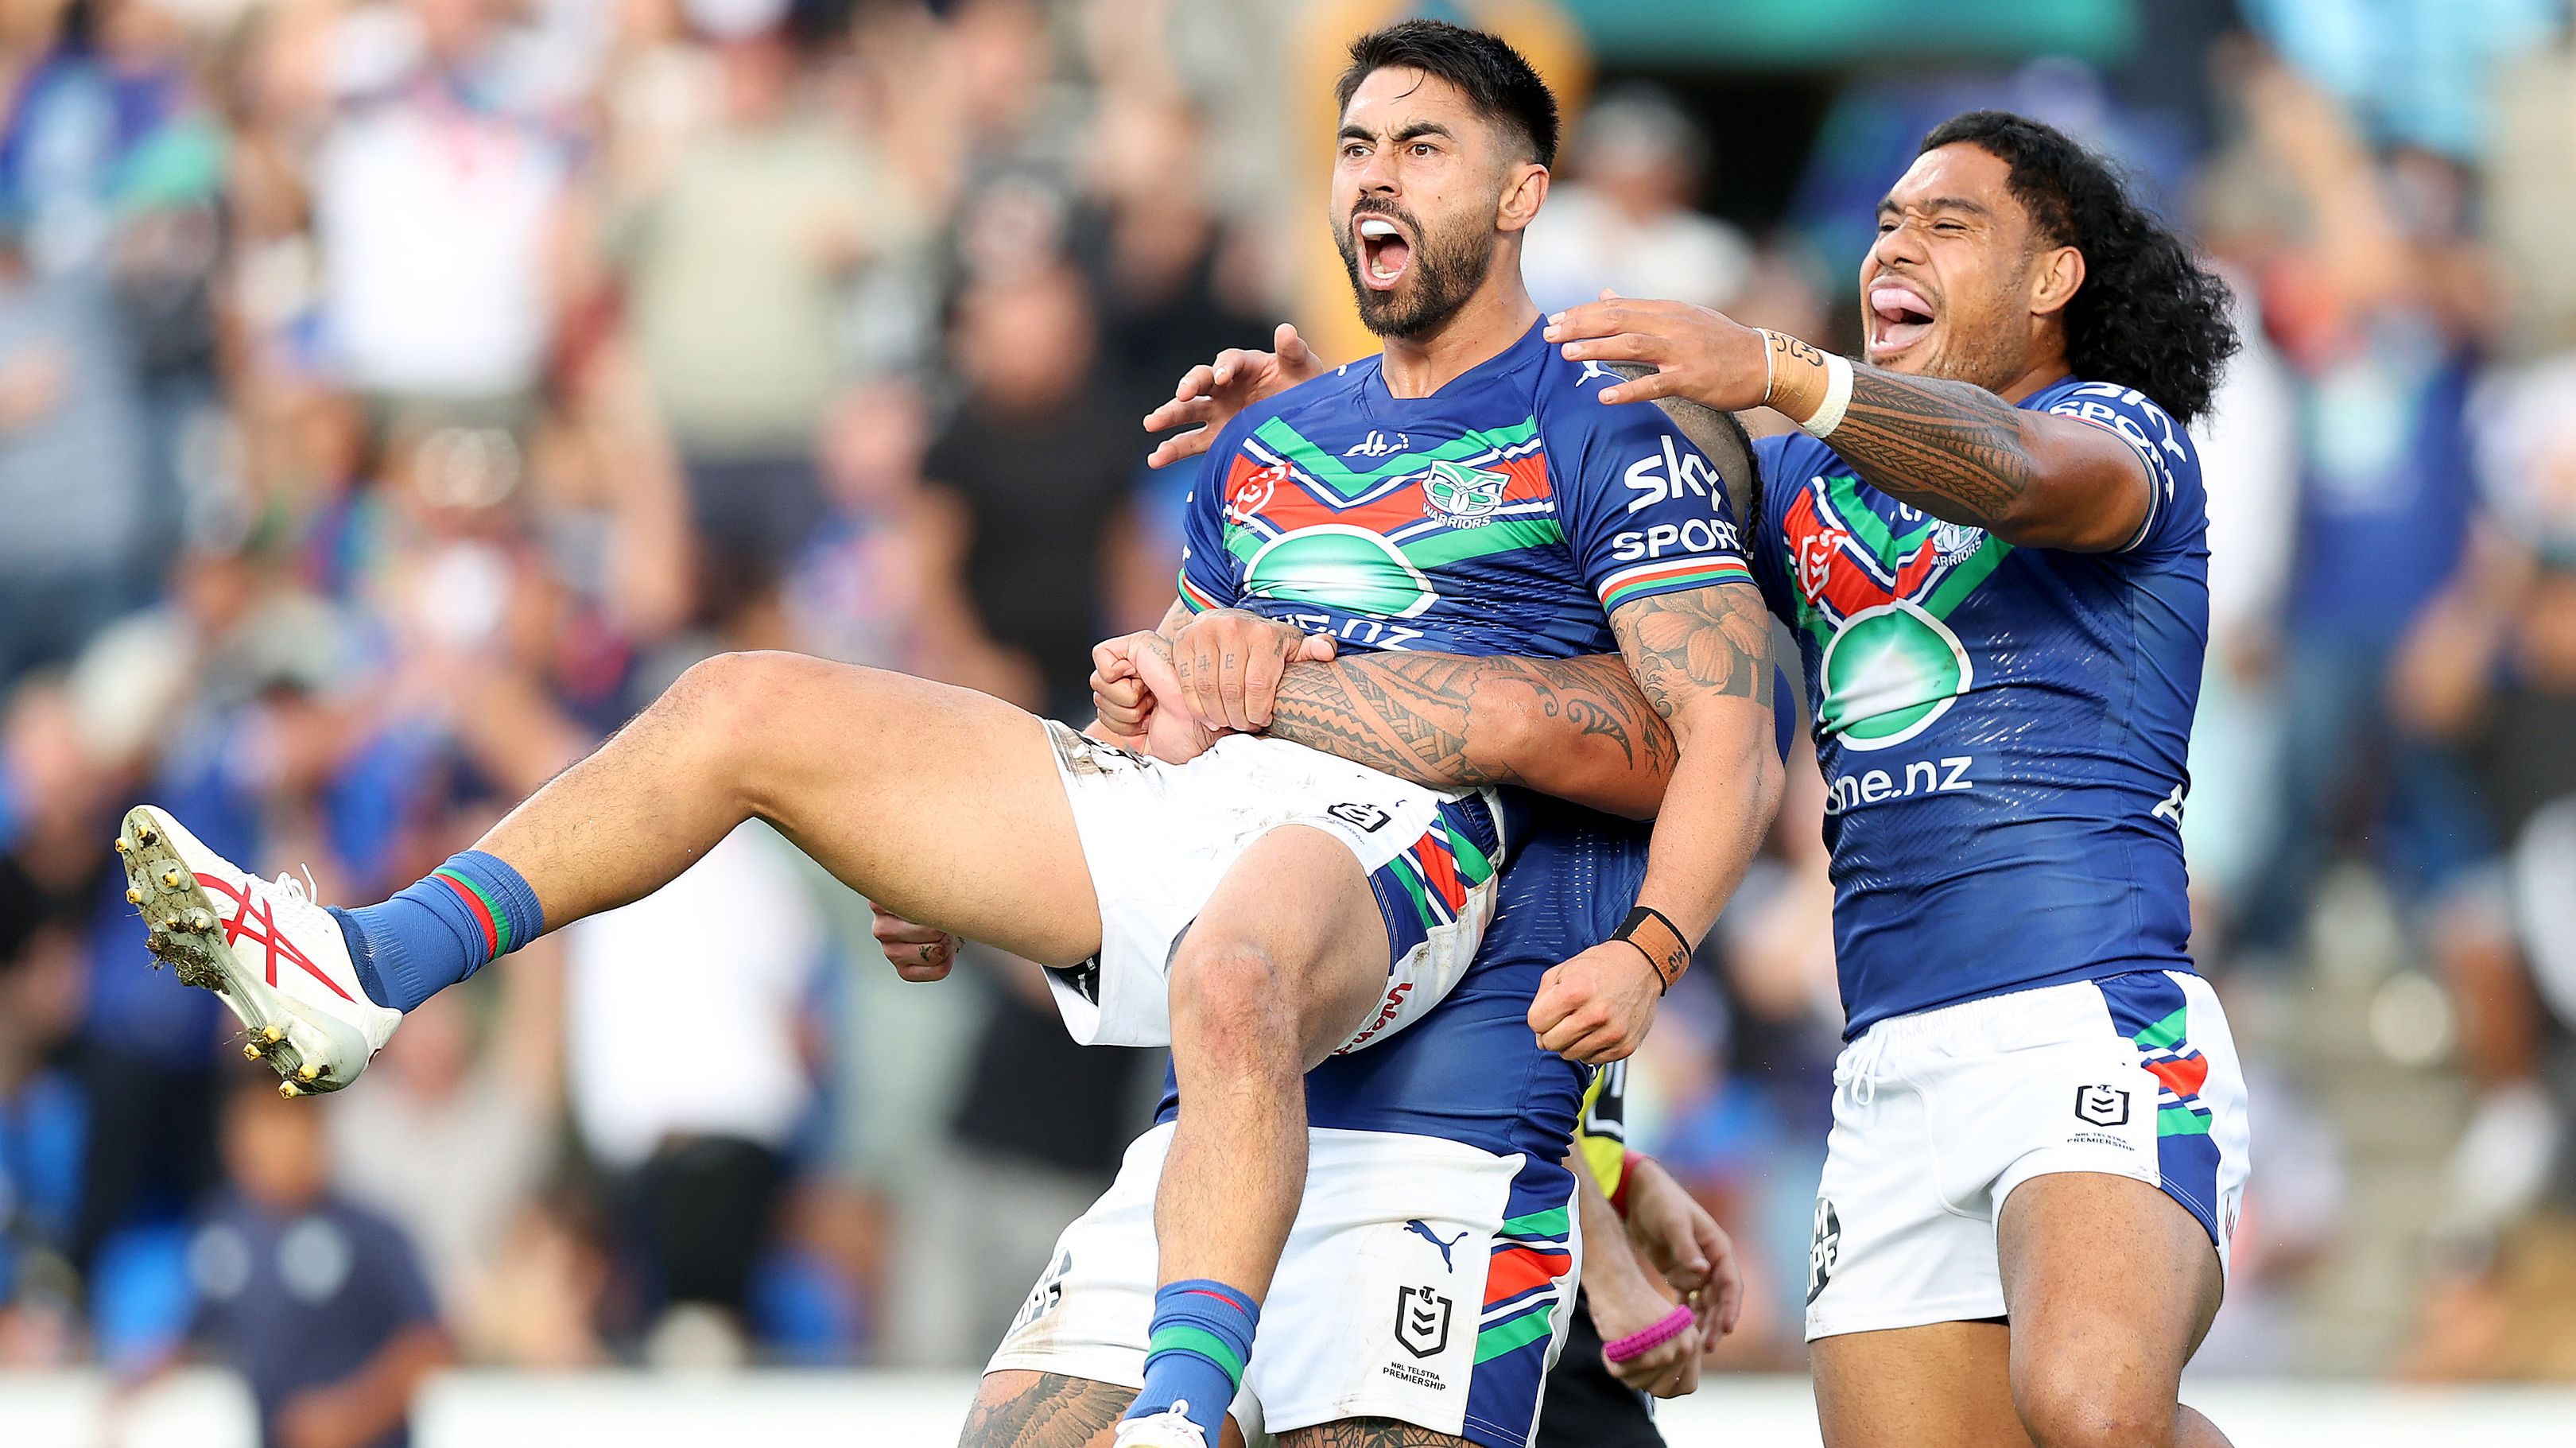 AUCKLAND, NEW ZEALAND - MARCH 26: Shaun Johnson of the Warriors celebrates his try during the round four NRL match between New Zealand Warriors and Canterbury Bulldogs at Mt Smart Stadium on March 26, 2023 in Auckland, New Zealand. (Photo by Phil Walter/Getty Images)